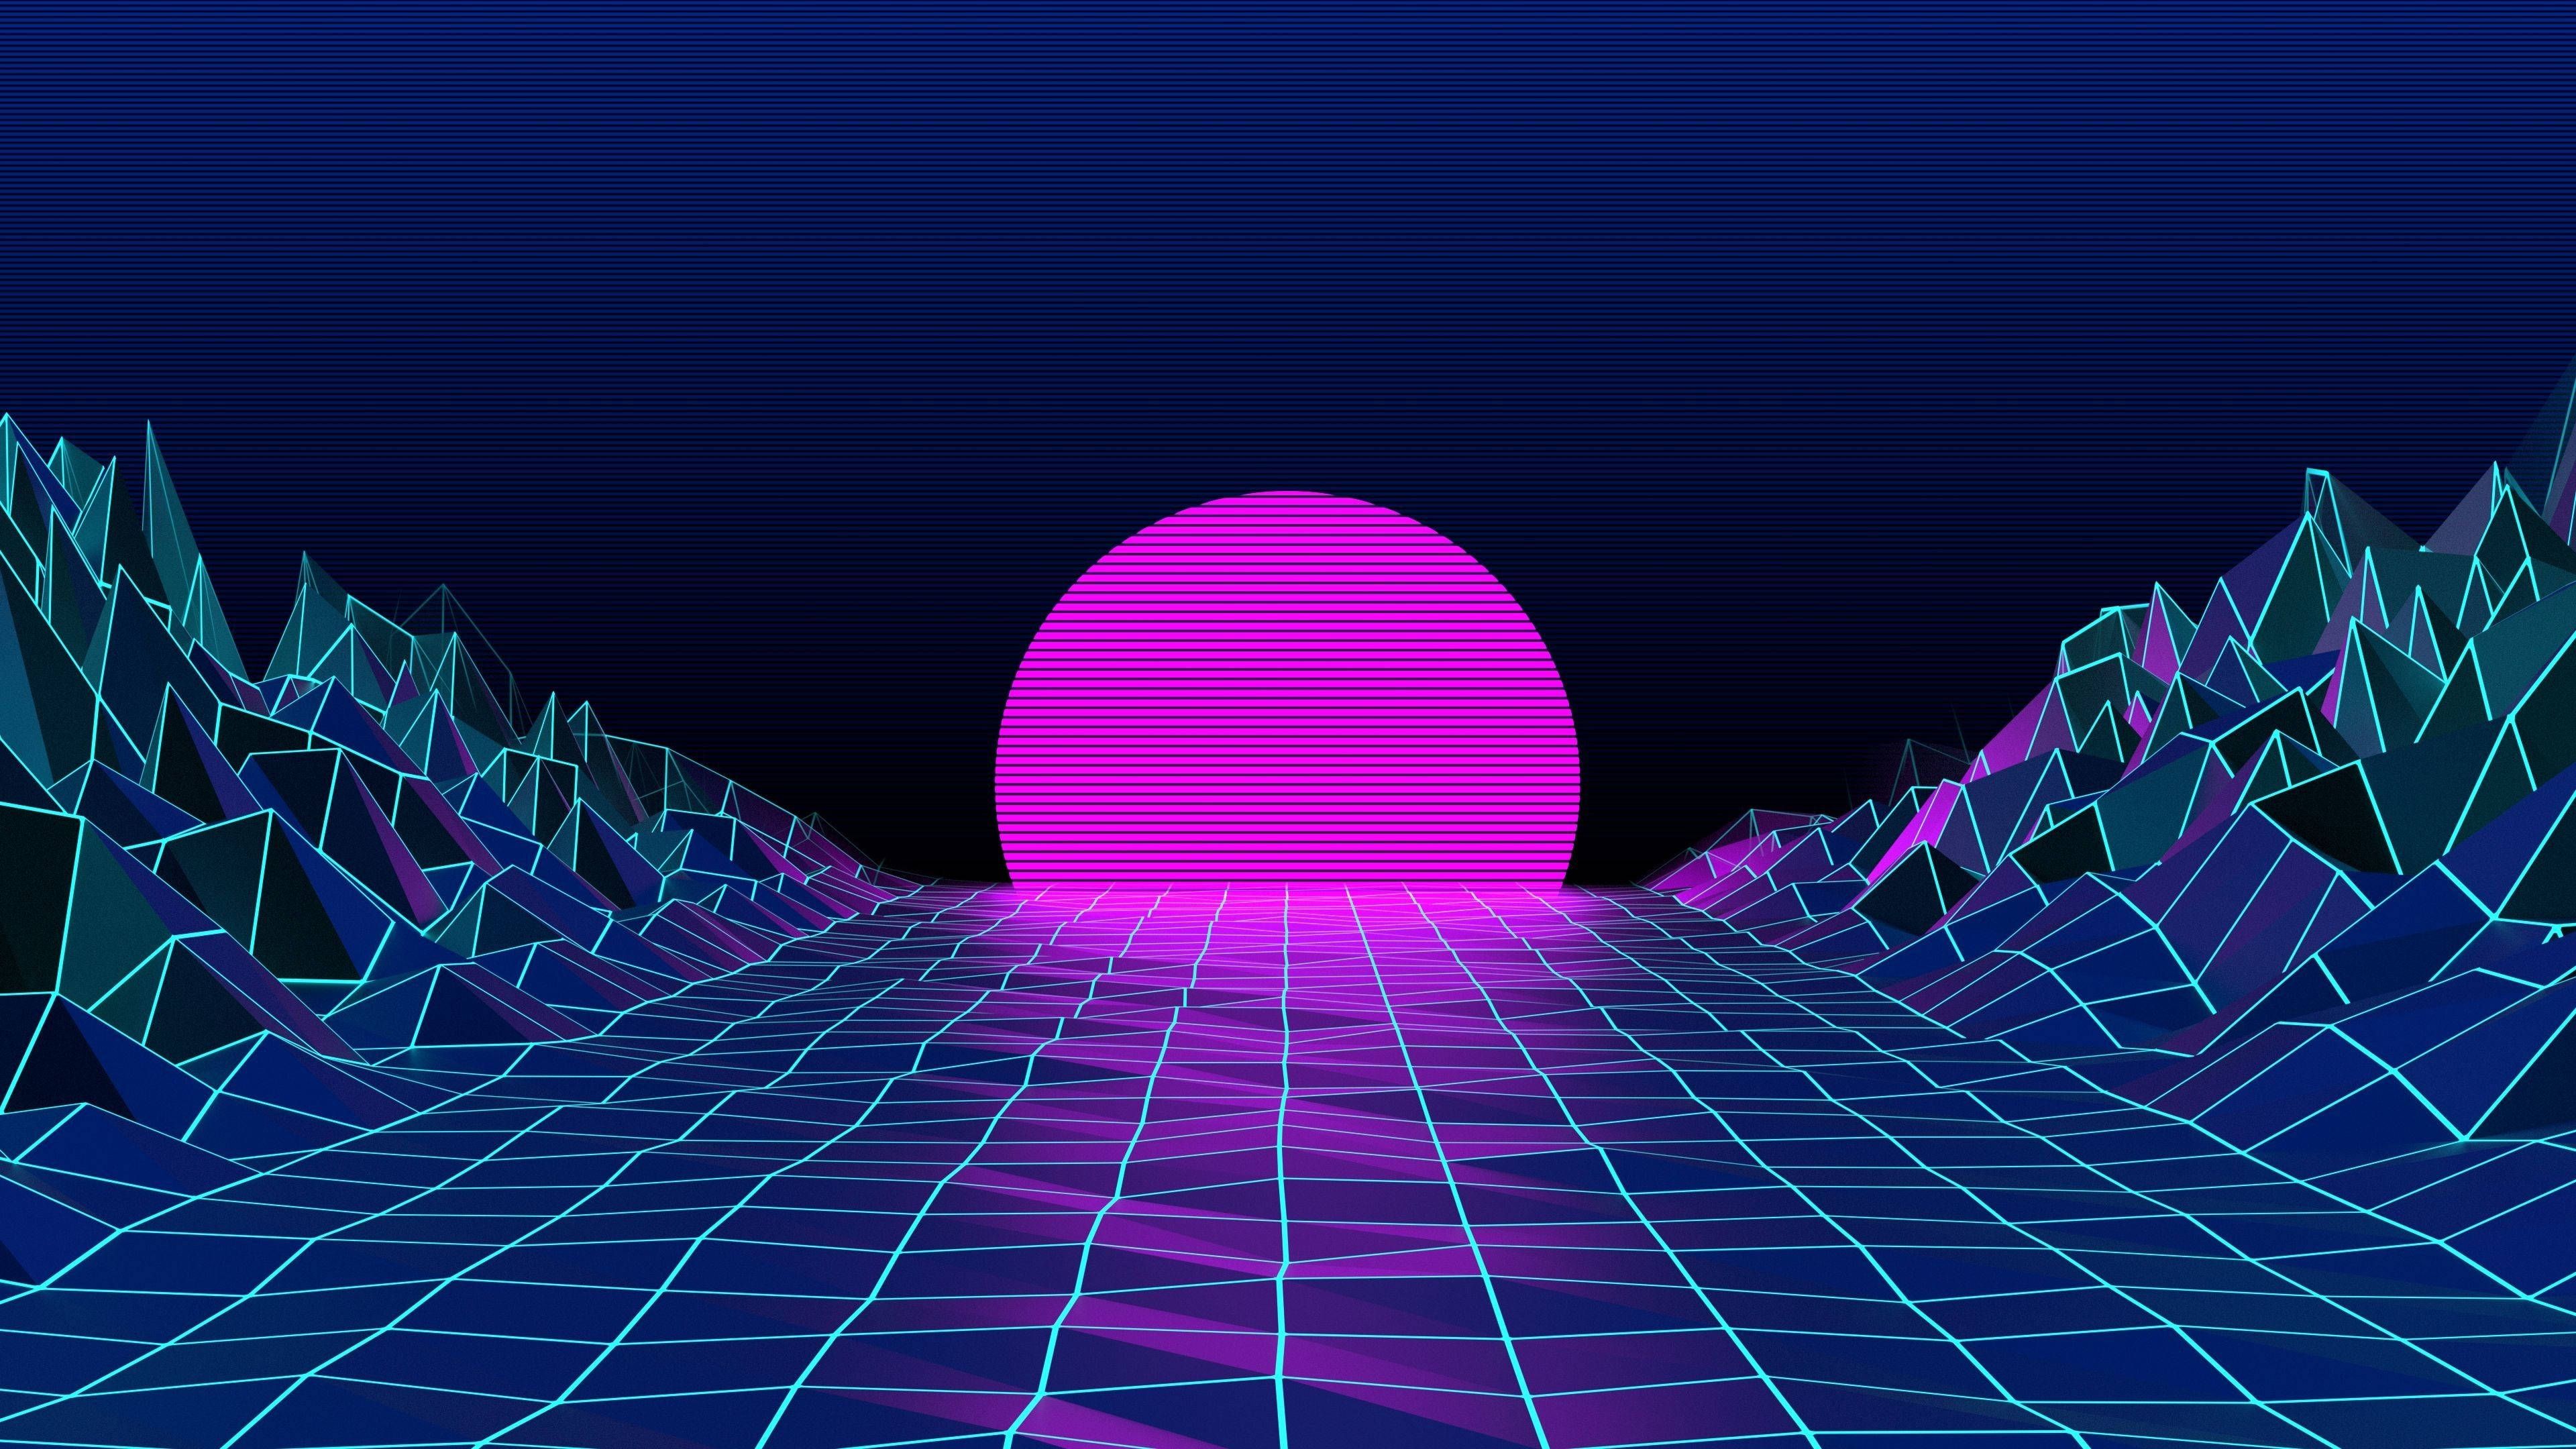 A digital landscape with a pink glowing sphere in the center and a grid pattern - Vaporwave